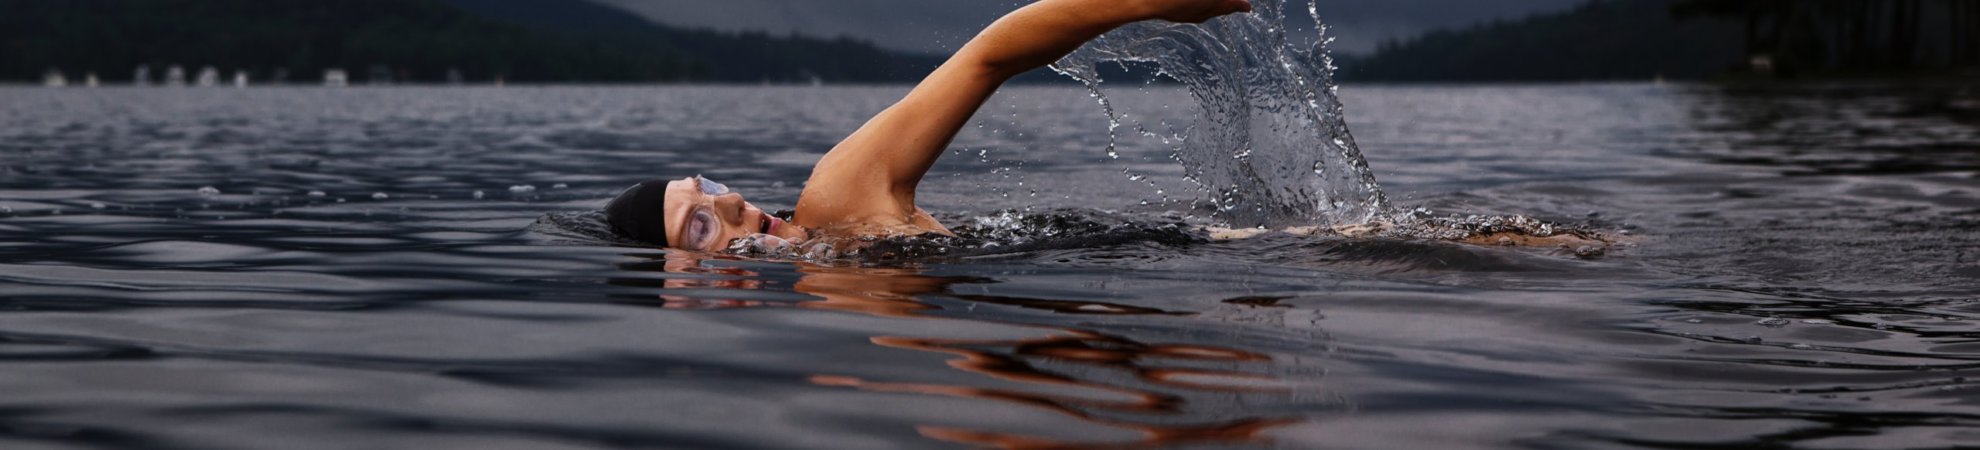 Open Water Swimming: Tips for your first open water race